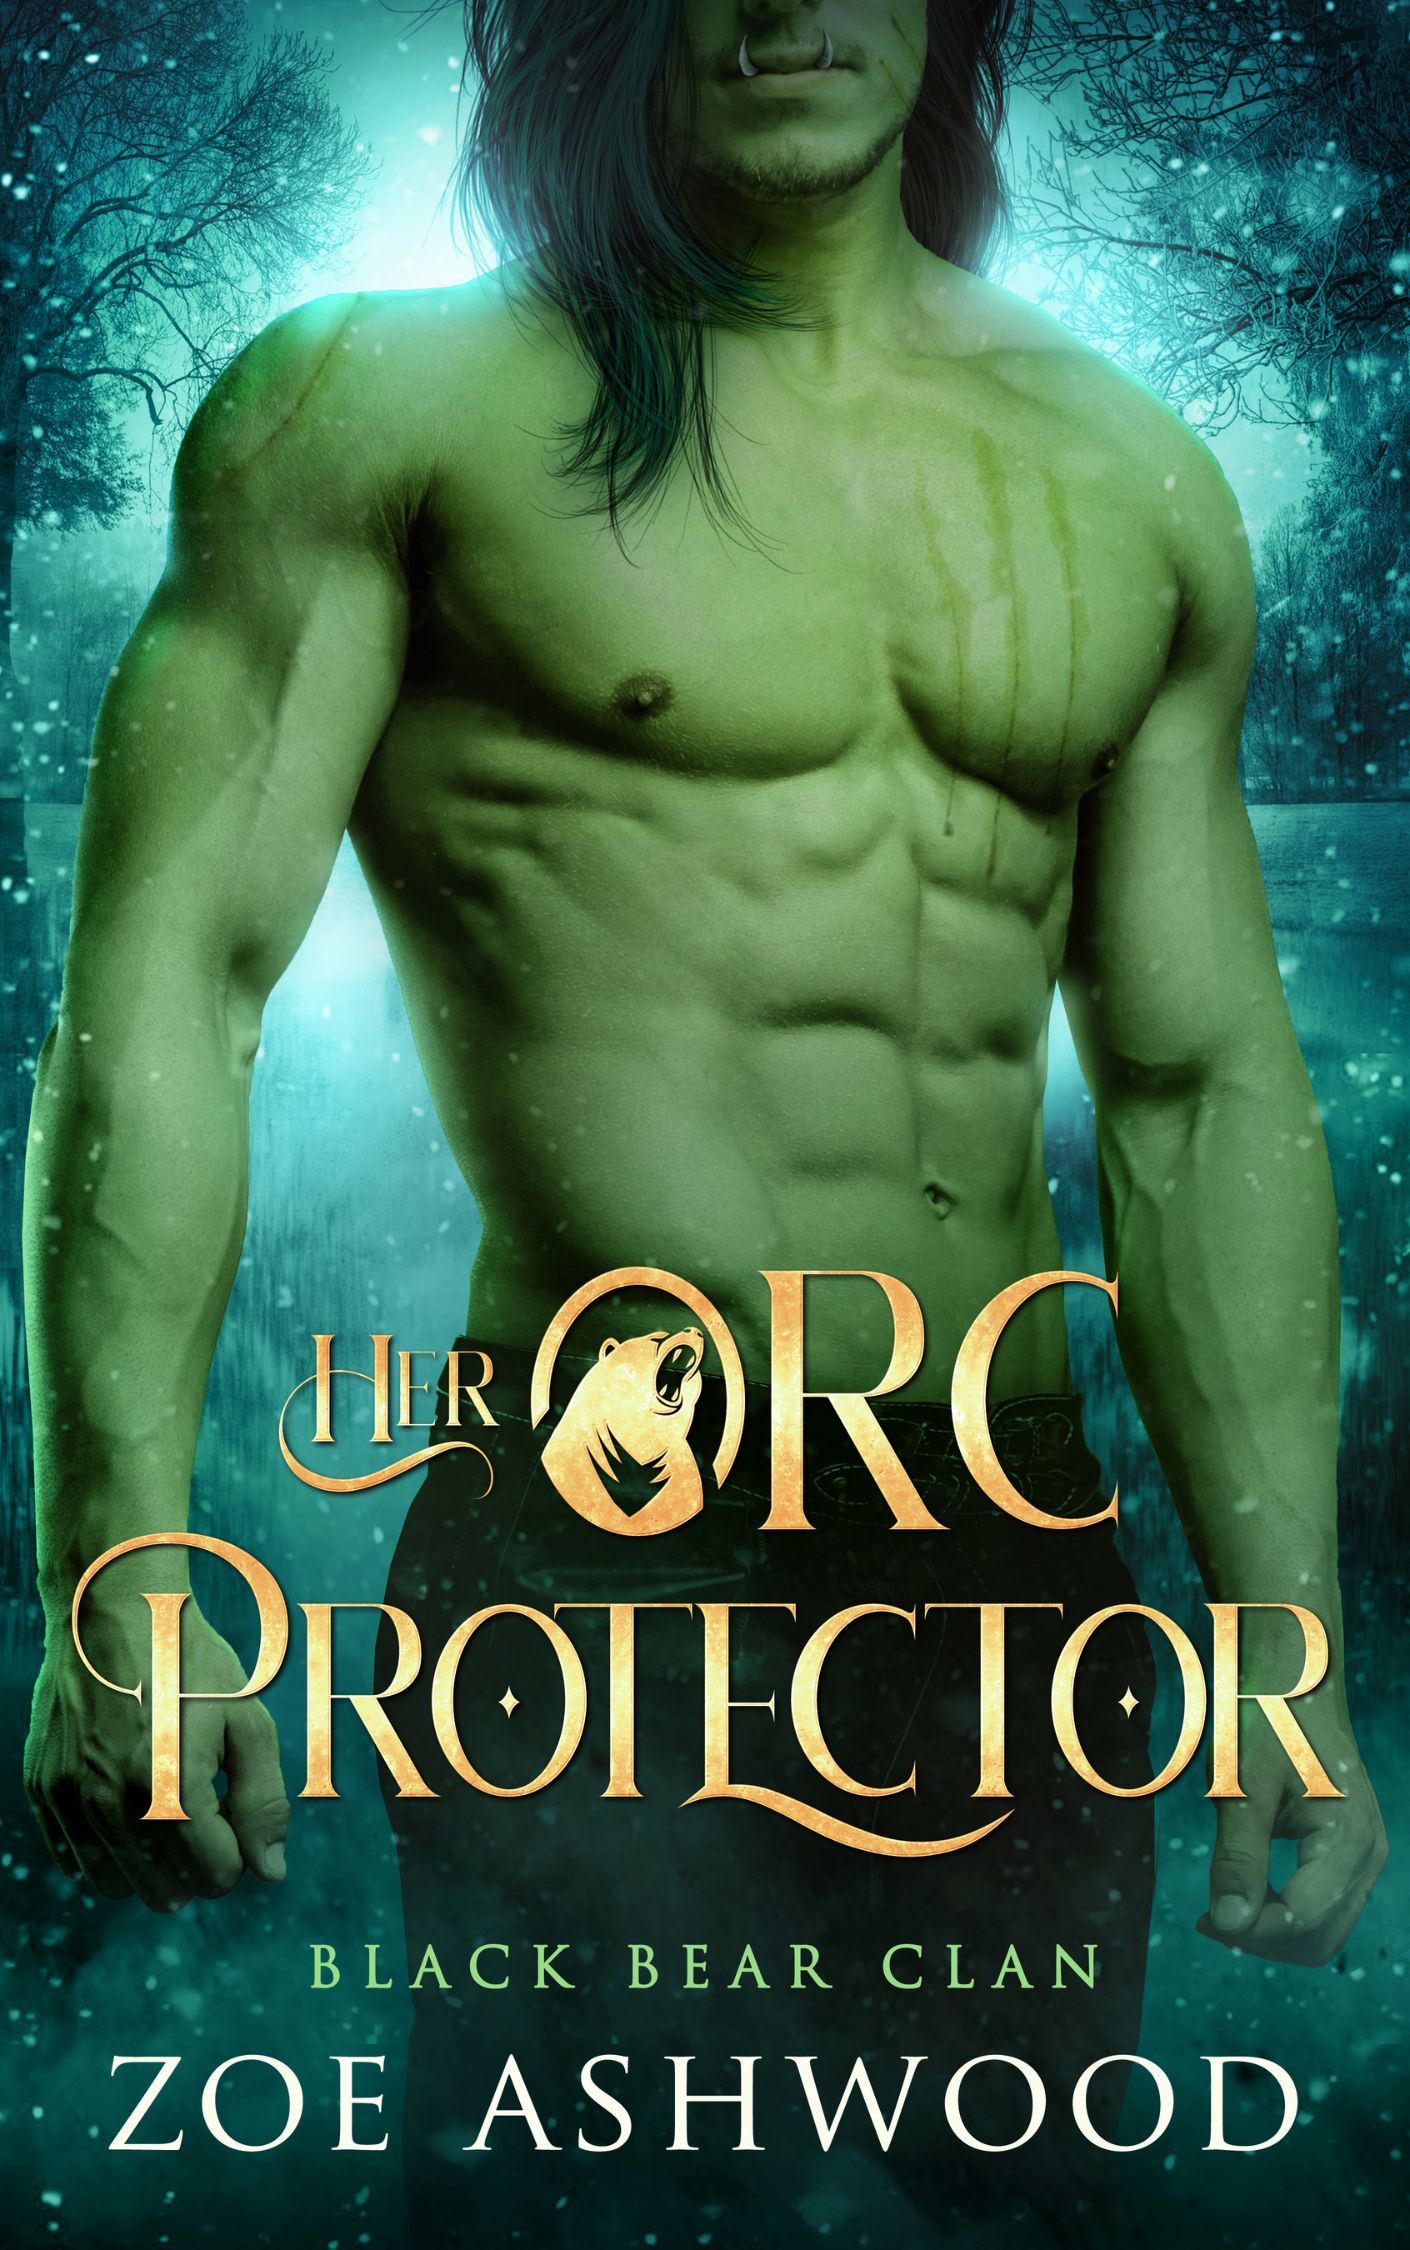 Her Orc Protector by Zoe Ashwood 